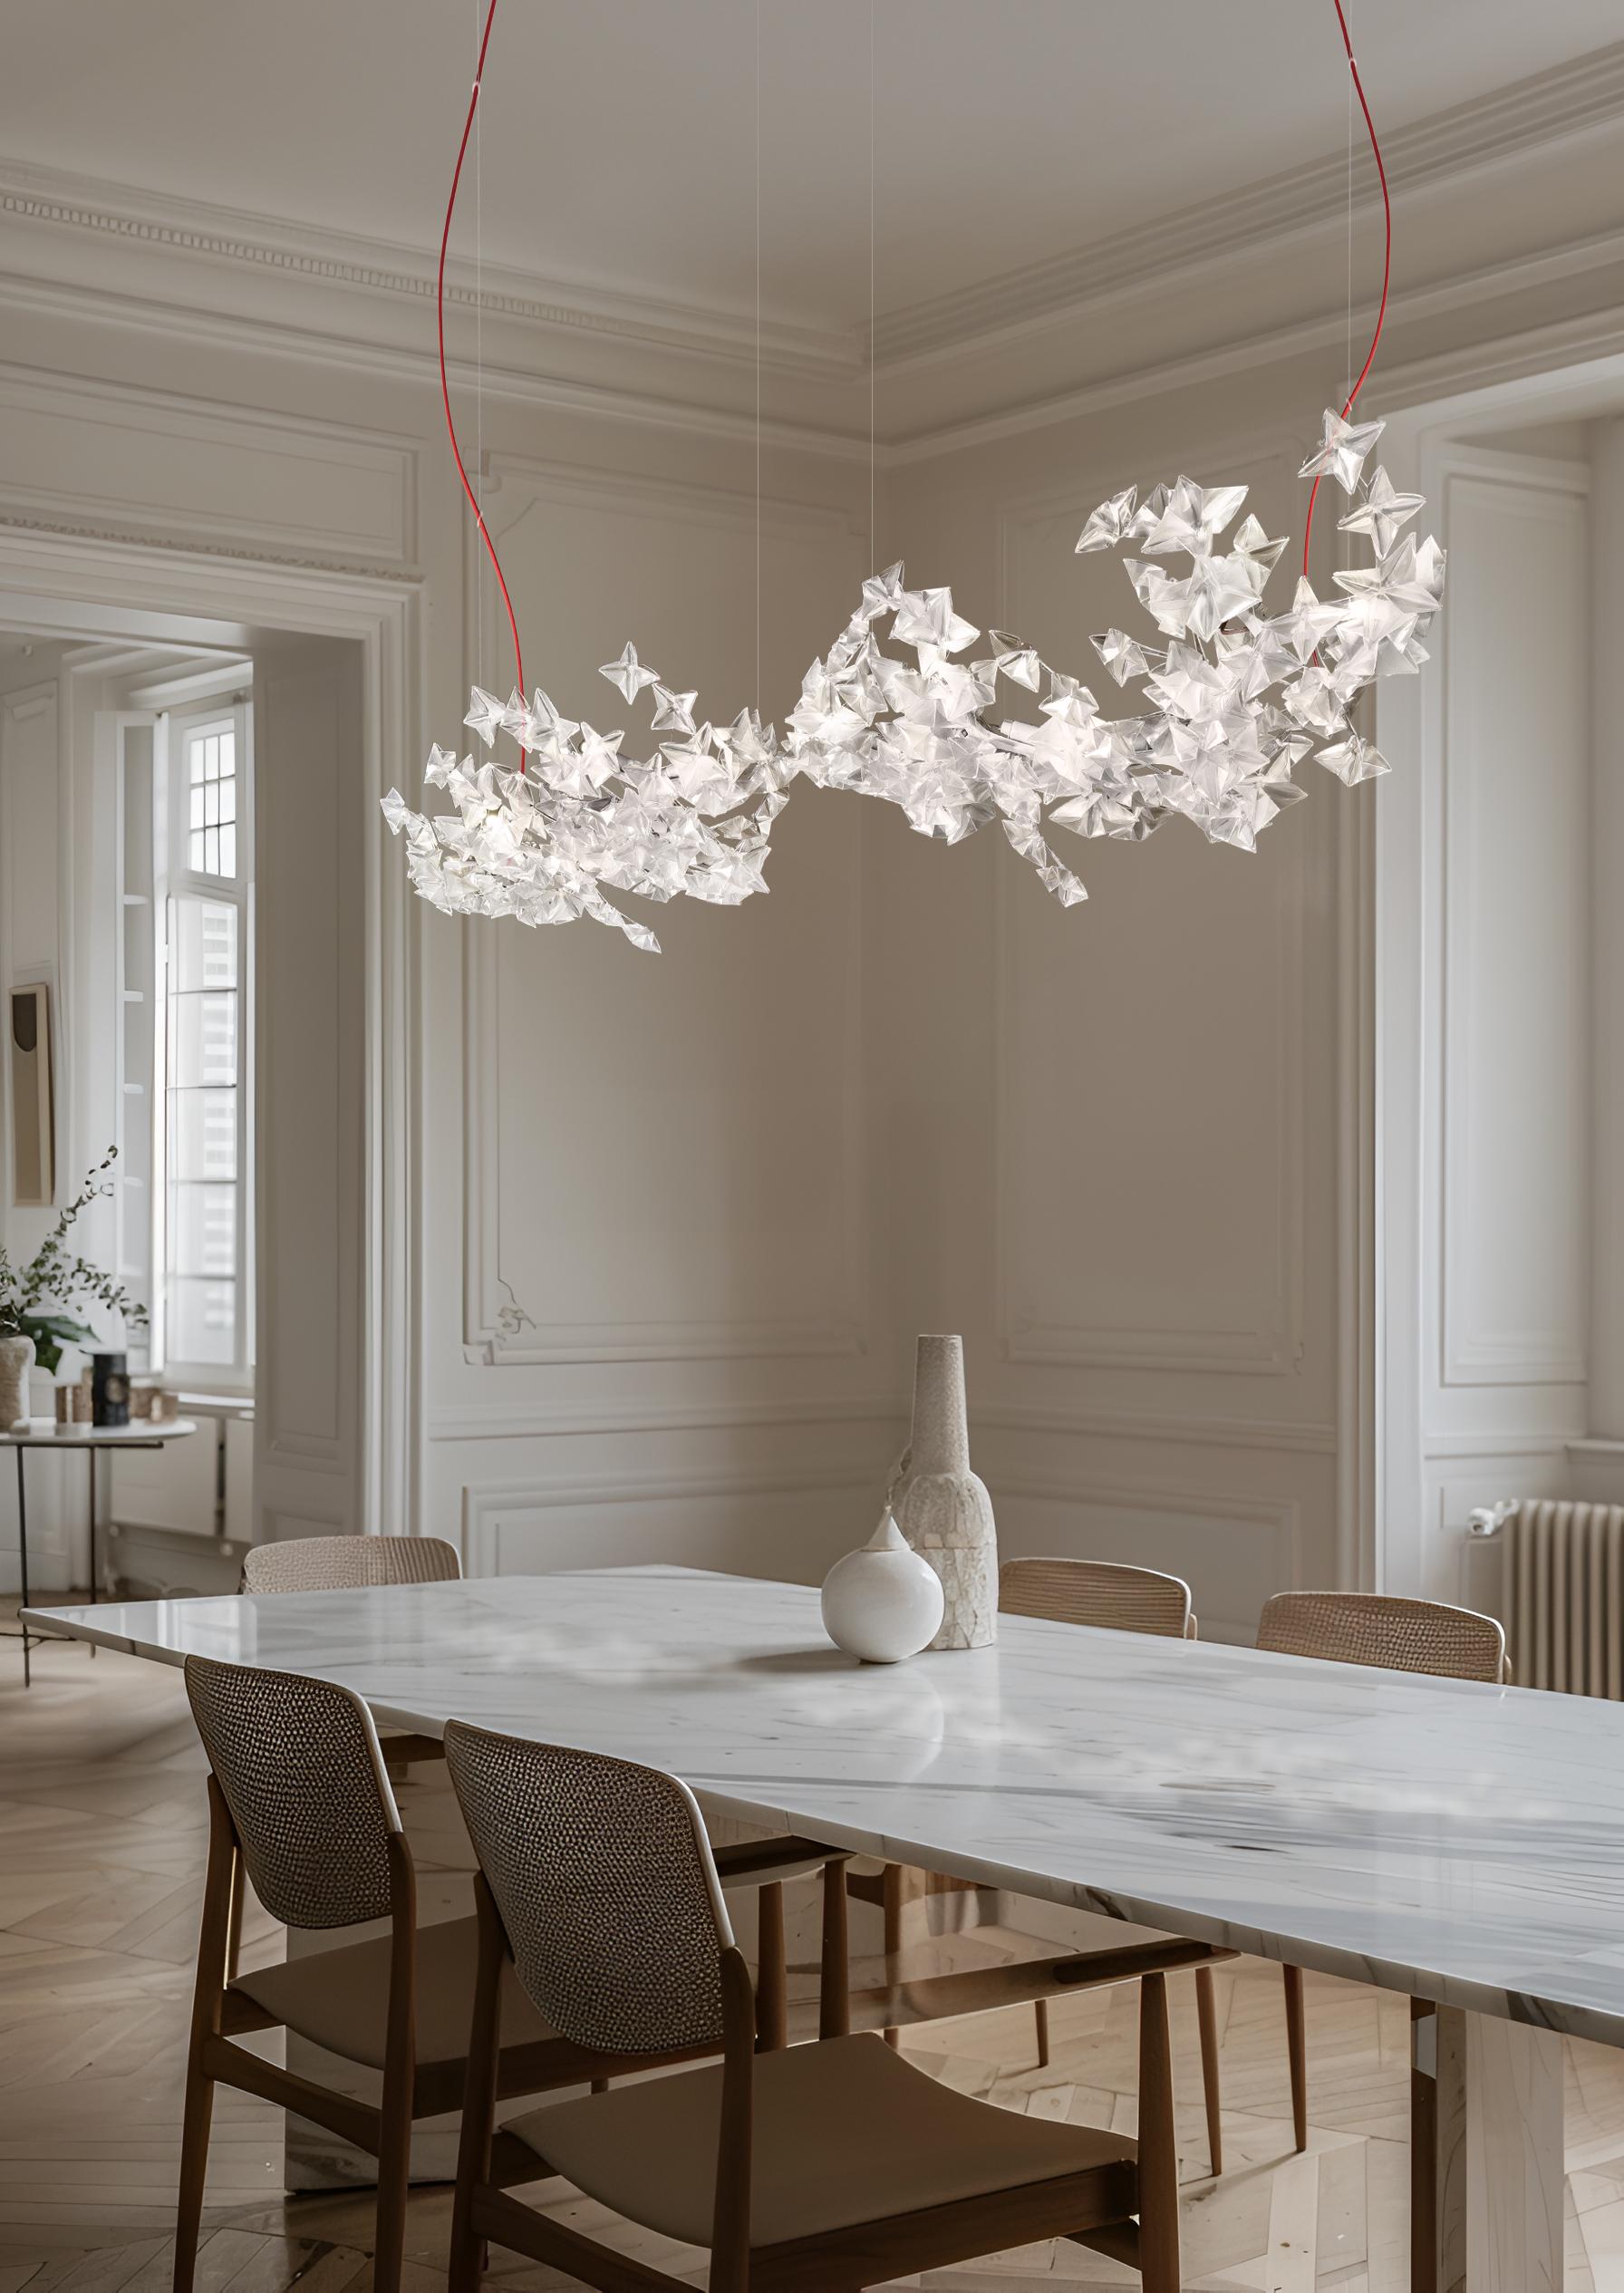 Hanami is a symbol of delicate poetry, taking its name from the traditional Japanese ritual of observing blossoming cherry trees. The Hanami family includes ethereal suspensions, available in two sizes, as well as an applique version that redefines